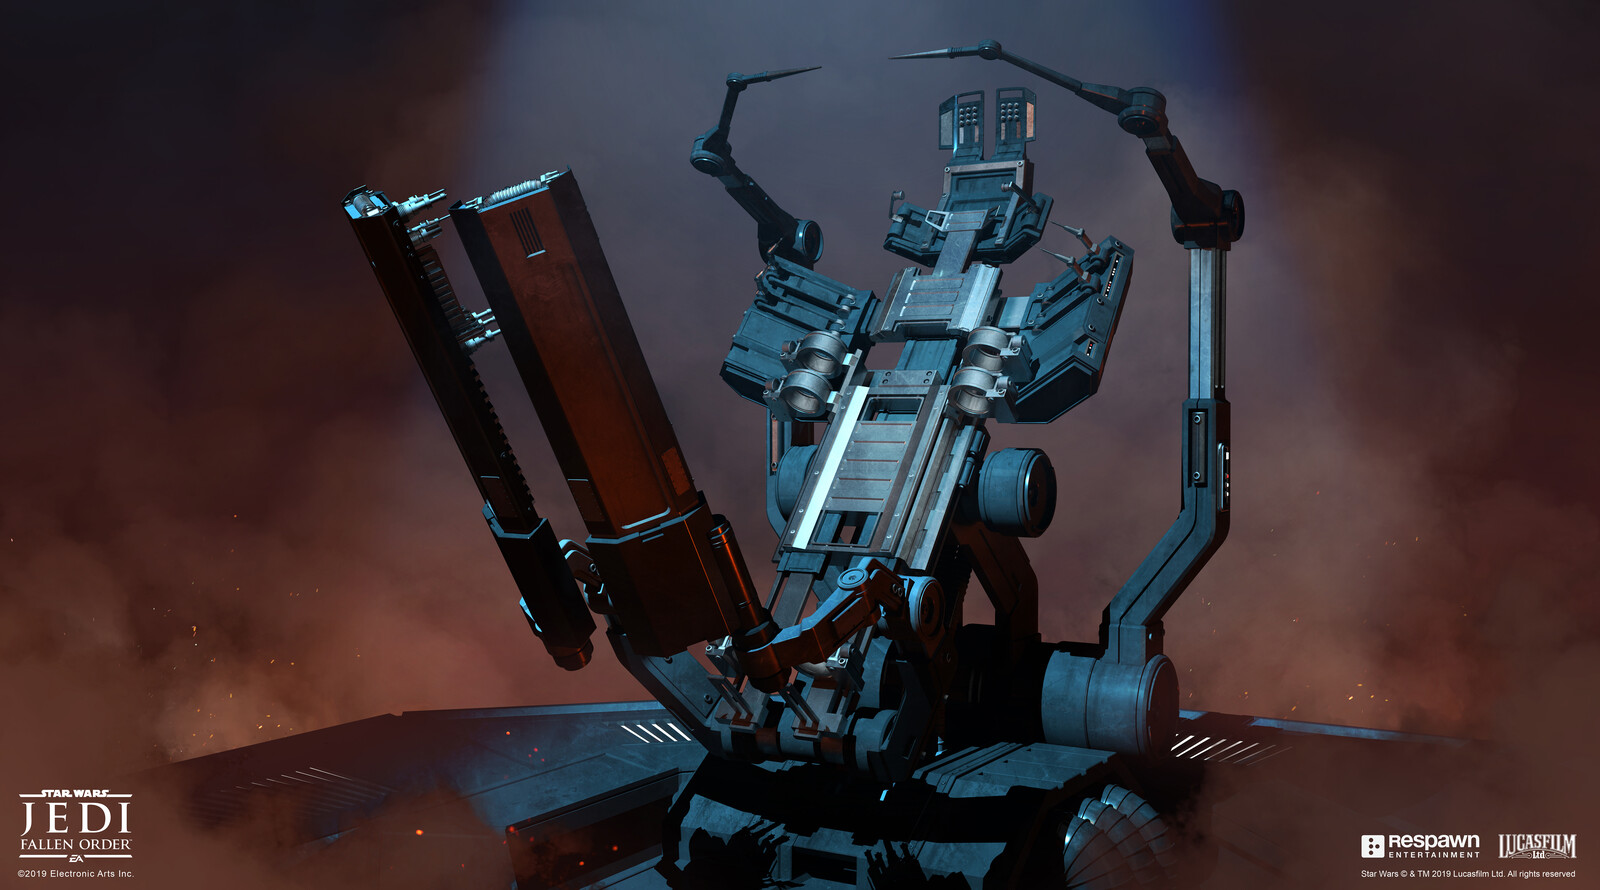 The torture chair had to be fully functional, it had to be the ultimate Empire torture device. It also had to include some elements from preceding torture devices (from Bespin, from  "Rebels", and from "the Force awakens") so the IP would be  represented.